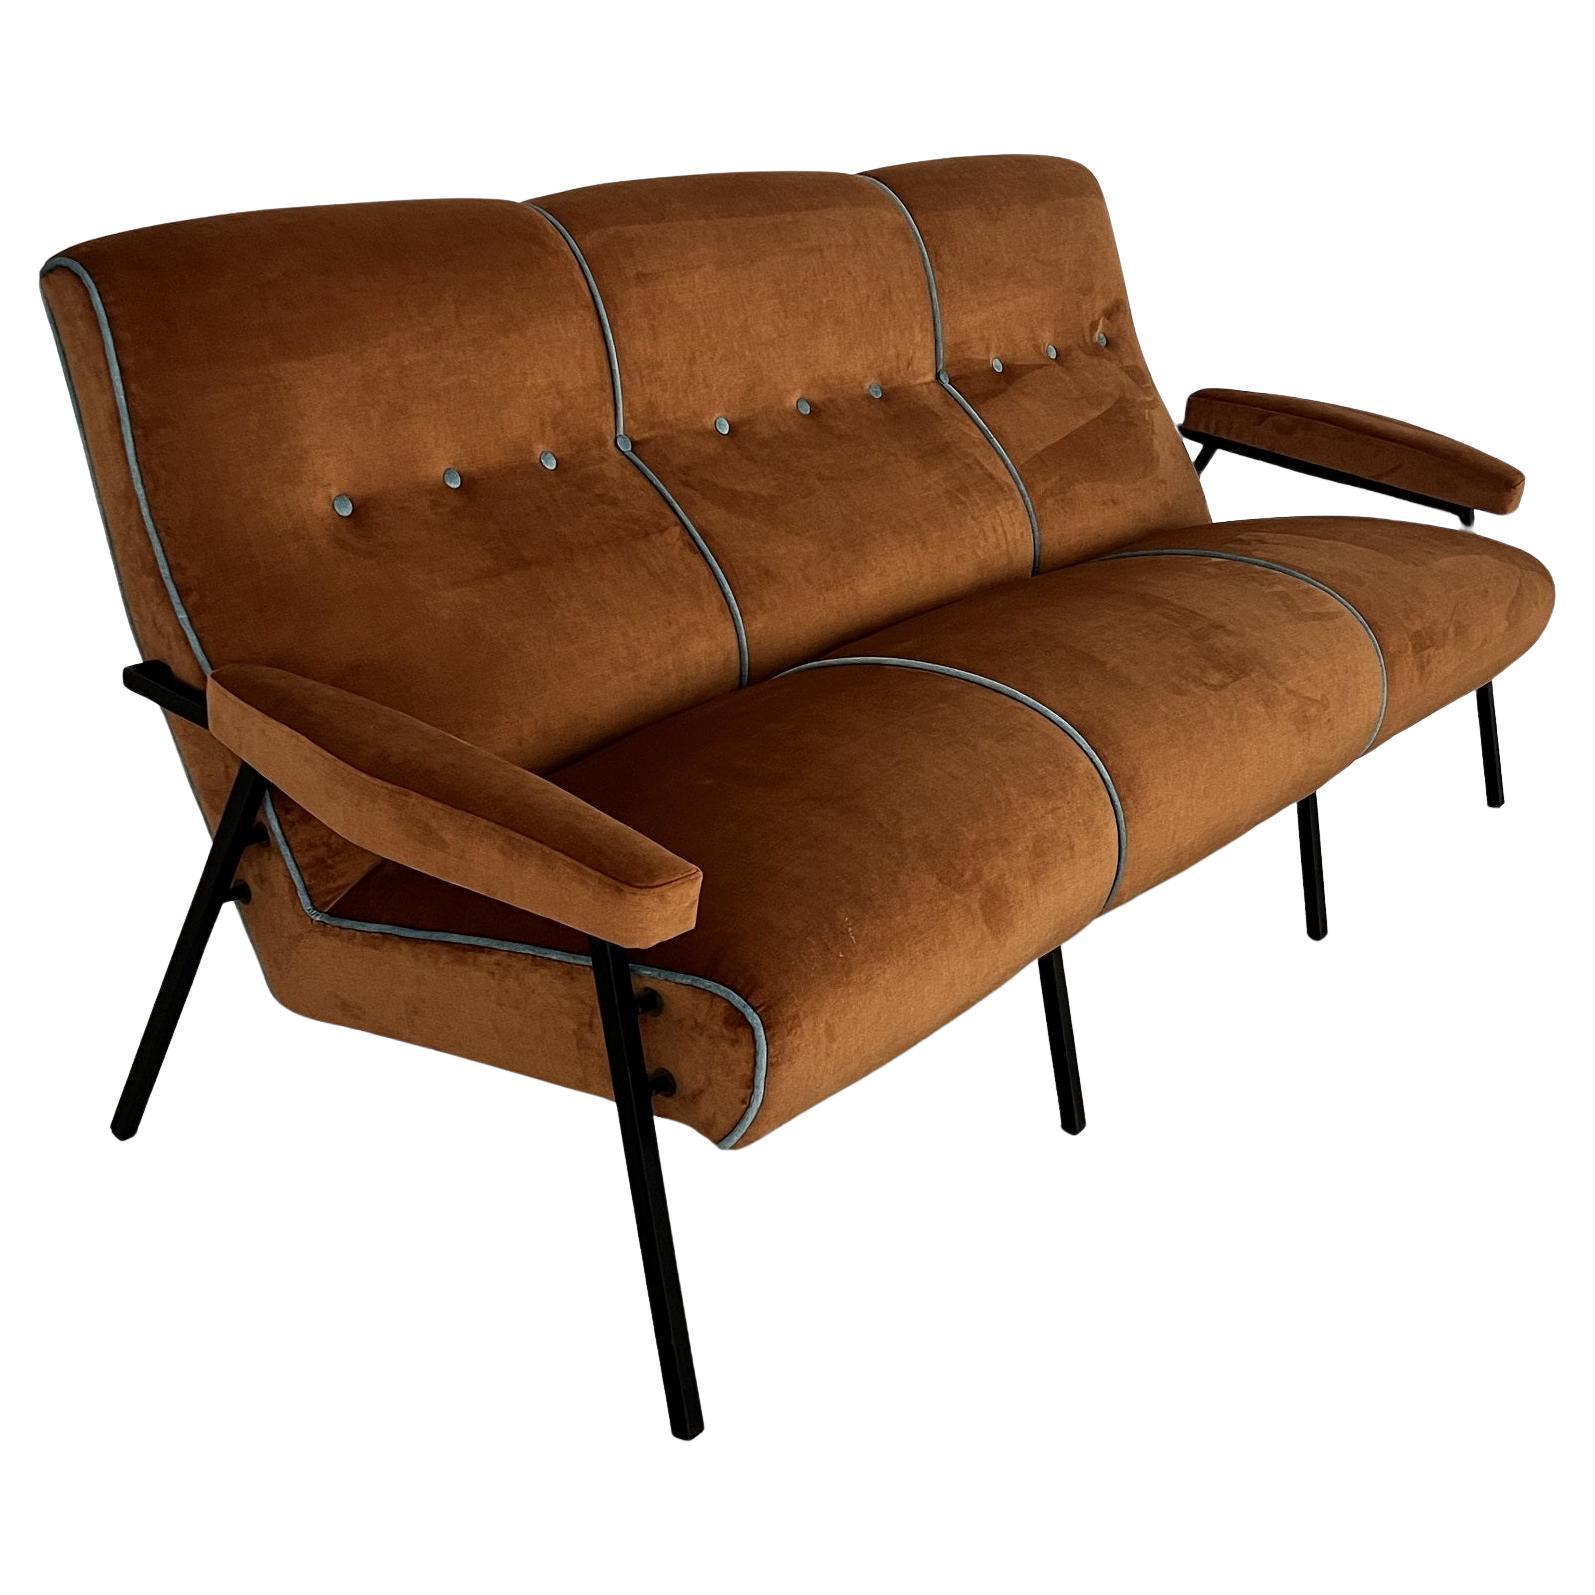 Italian Re-upholstered Midcentury Settee or Sofa For Sale